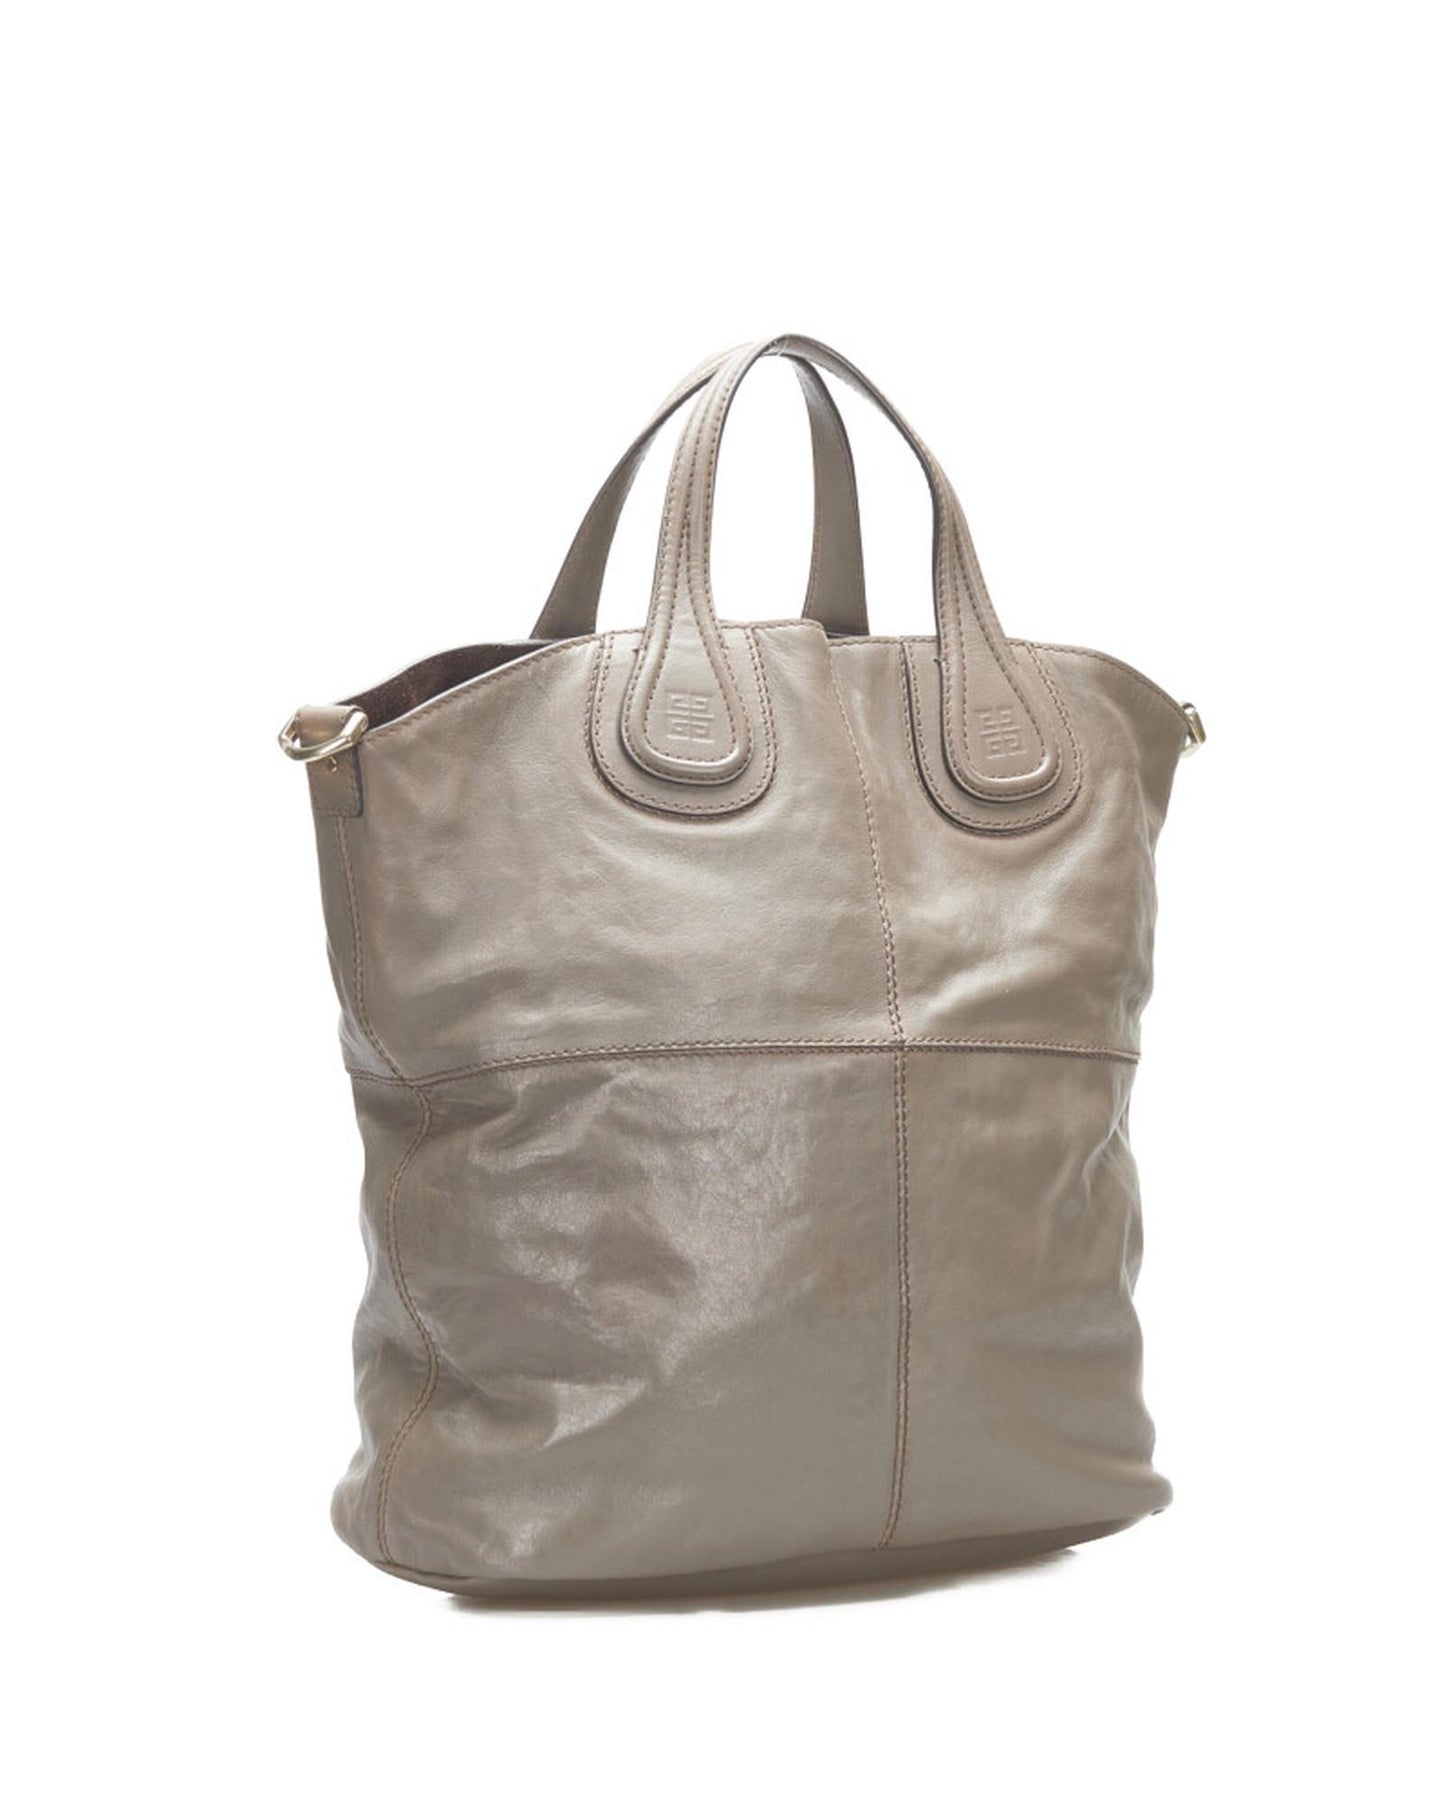 Givenchy Women's Leather Tote Bag in Excellent Condition in Grey